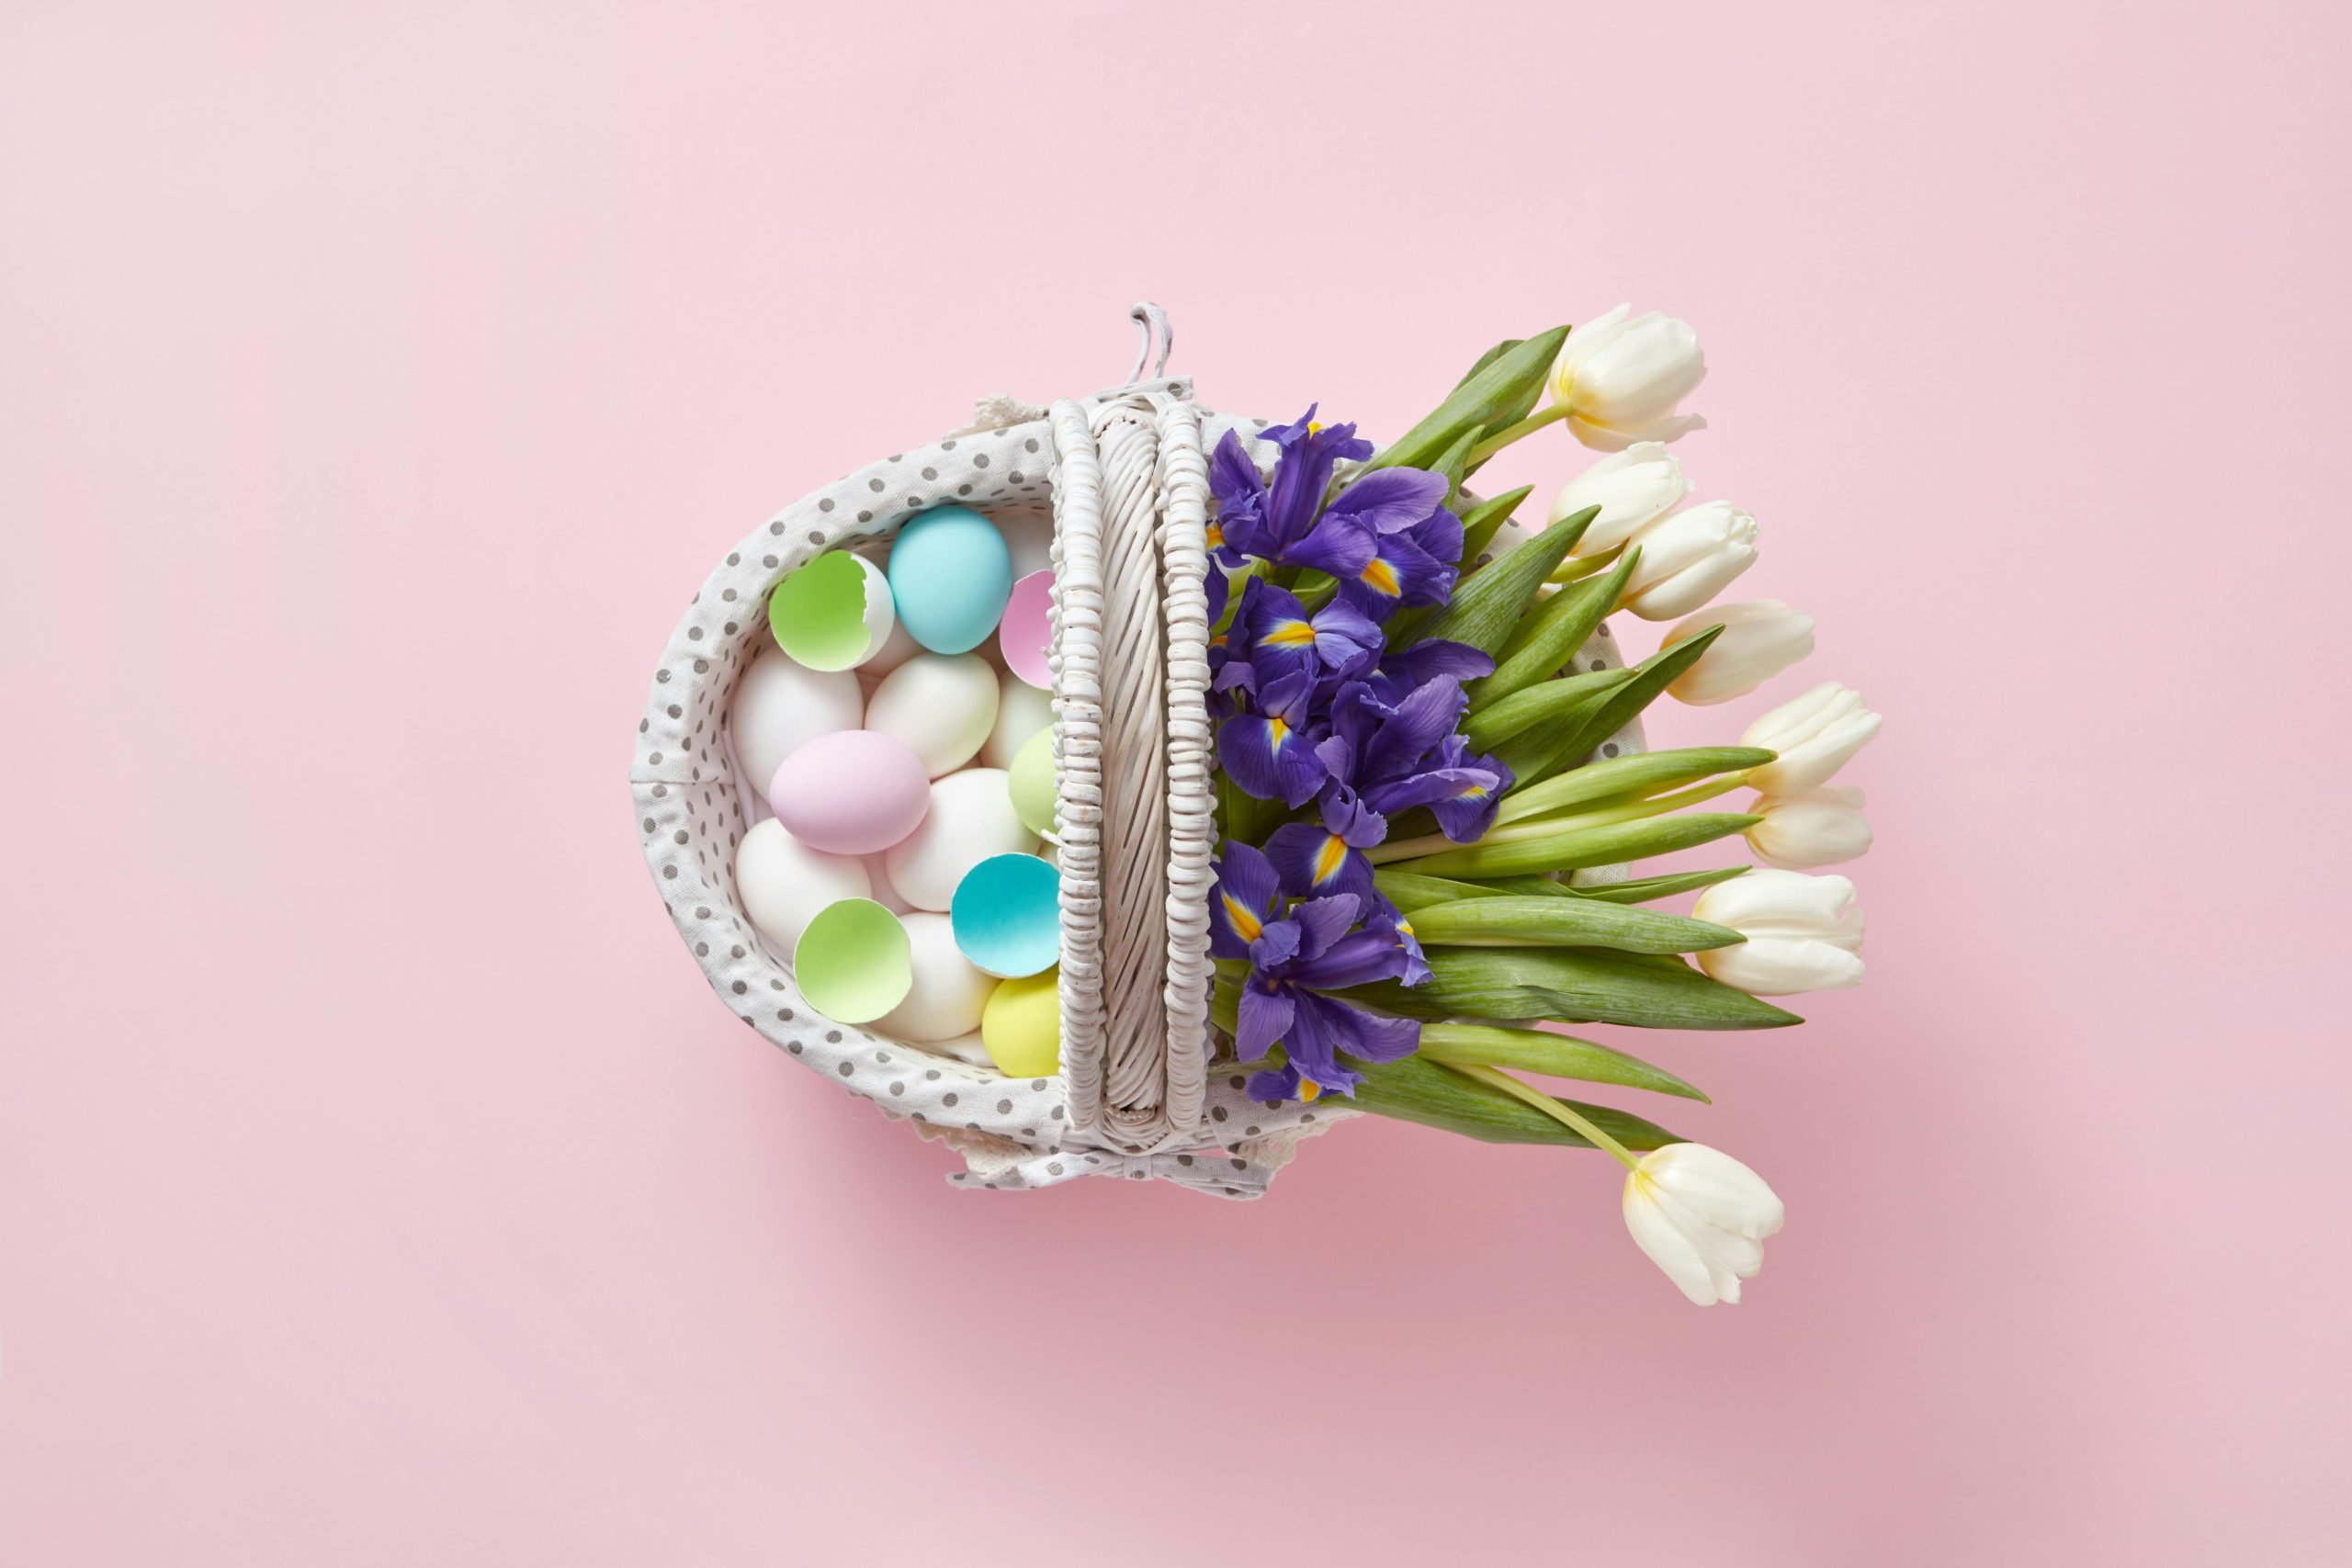 Amazing Easter Basket Ideas for a Festive and Fun Celebration